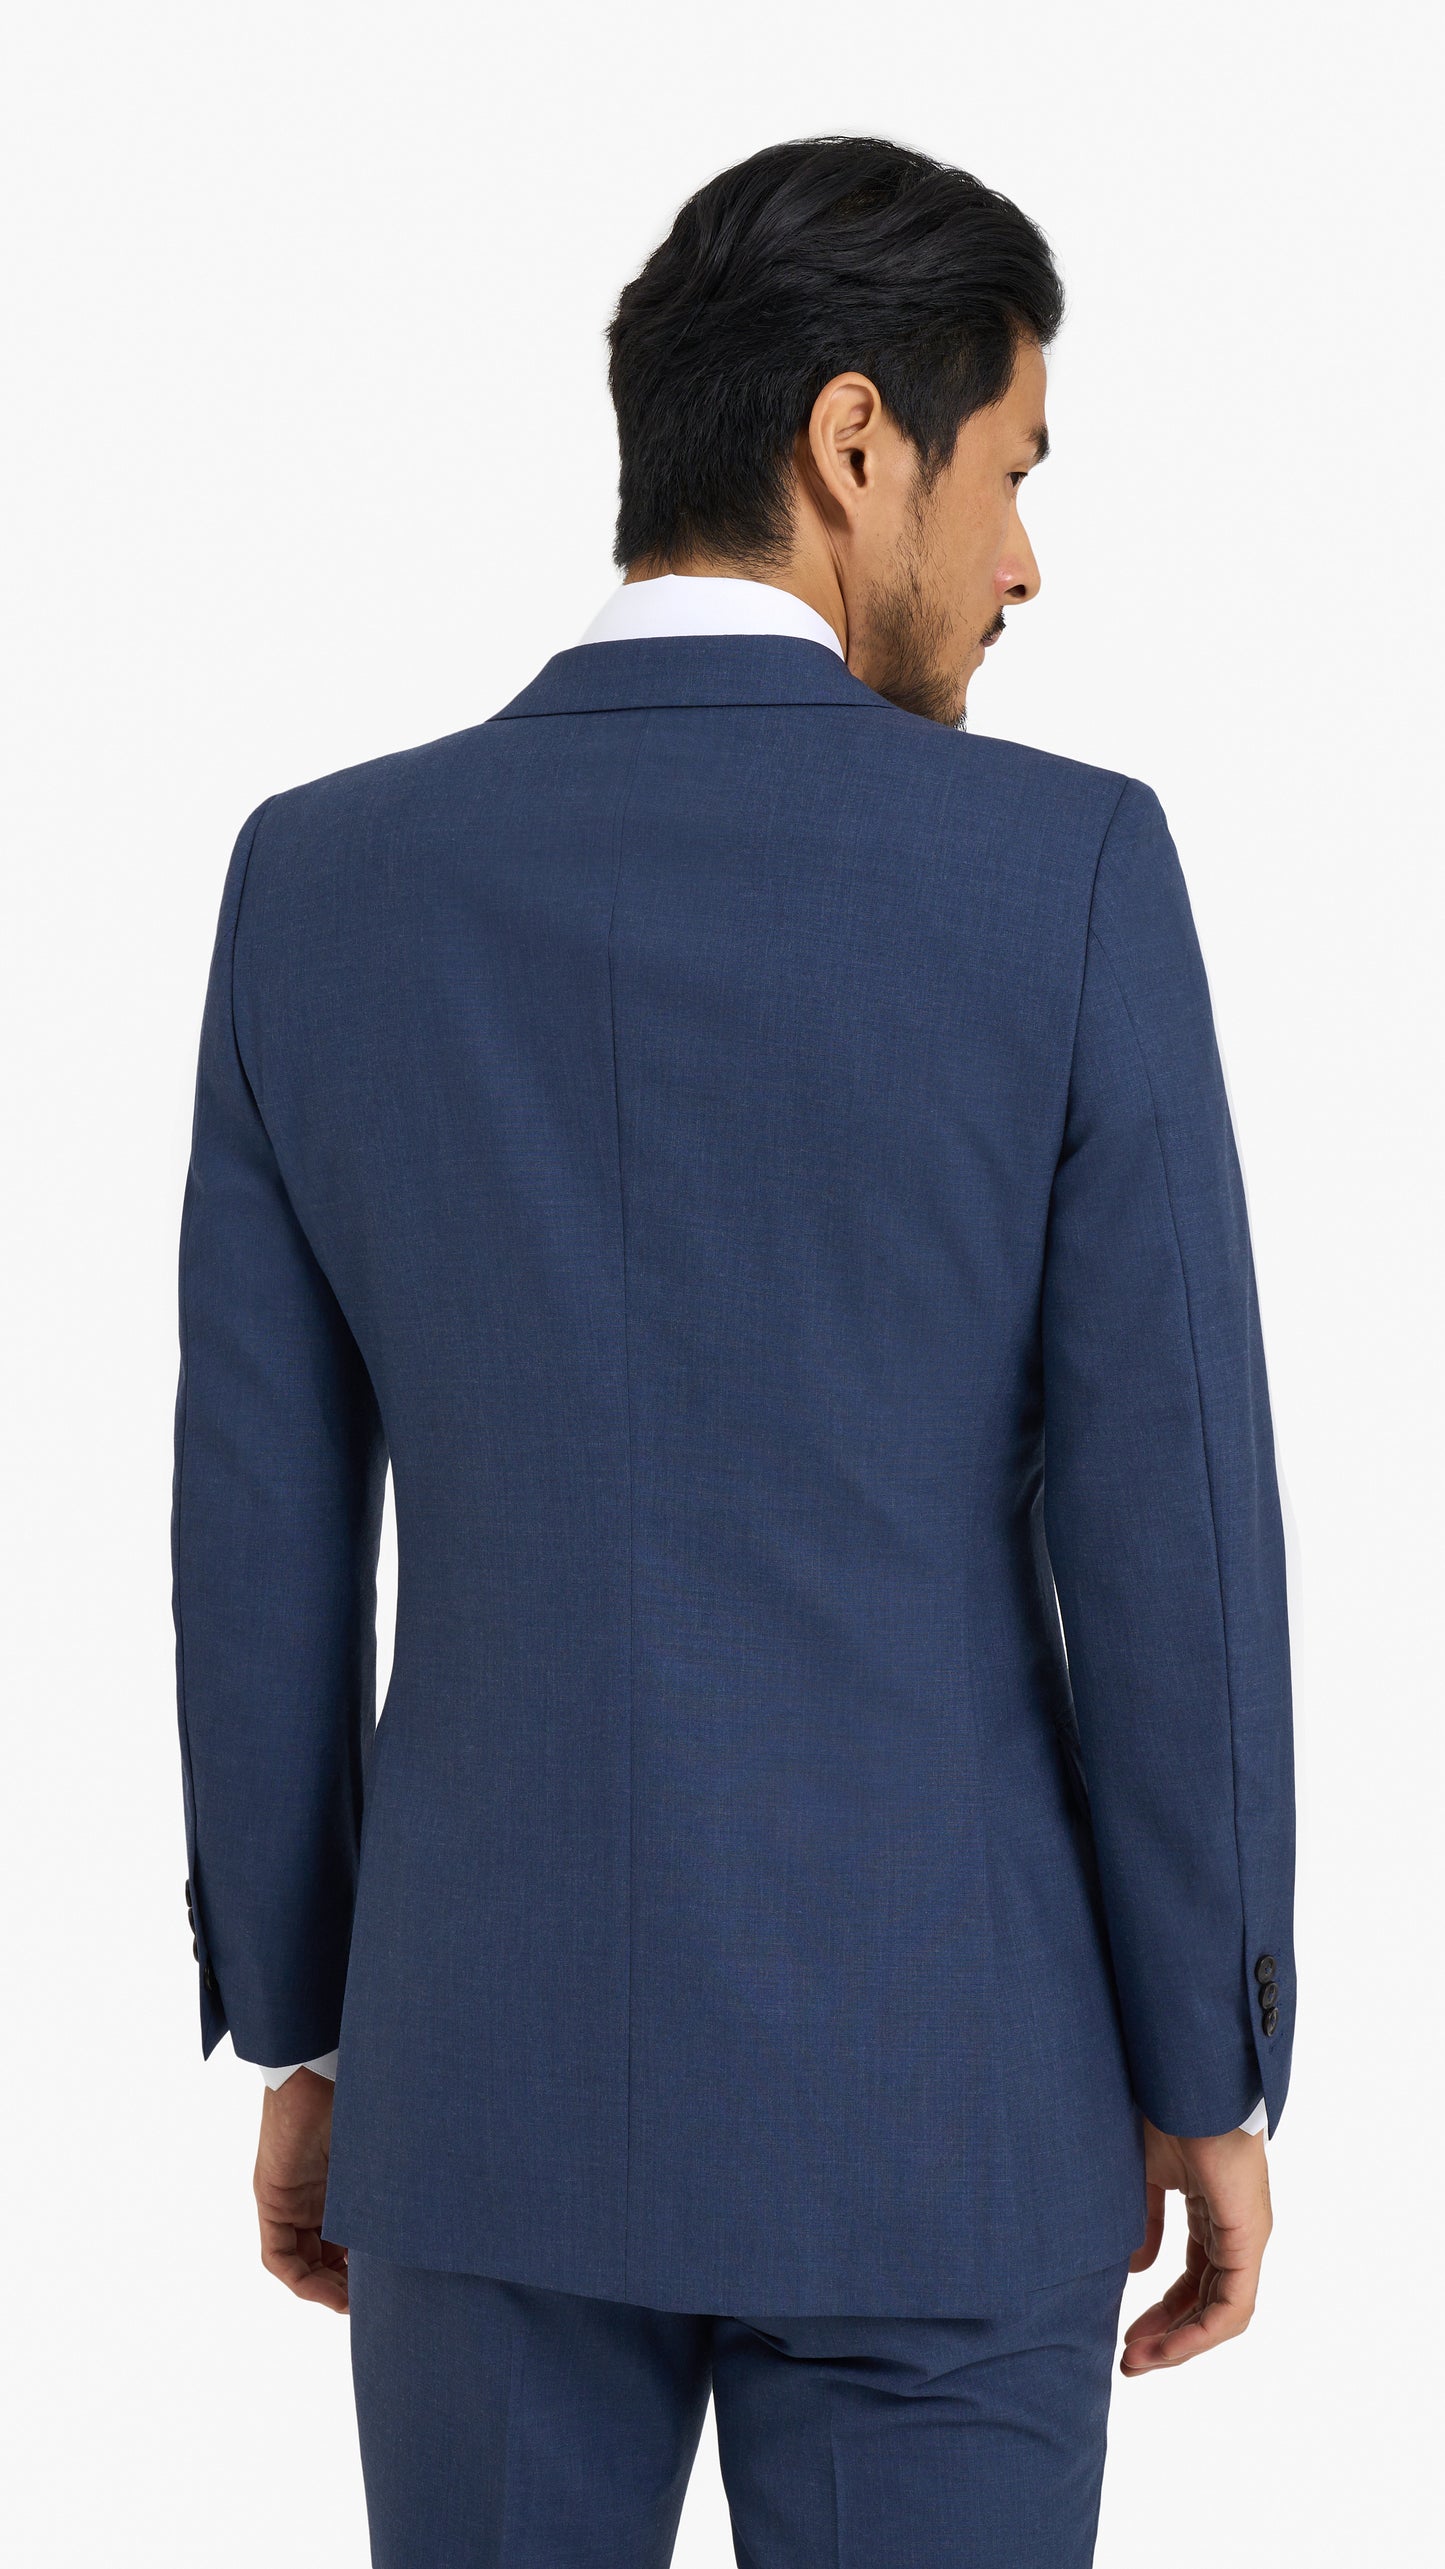 Holland & Sherry Airforce Blue Custom Suit